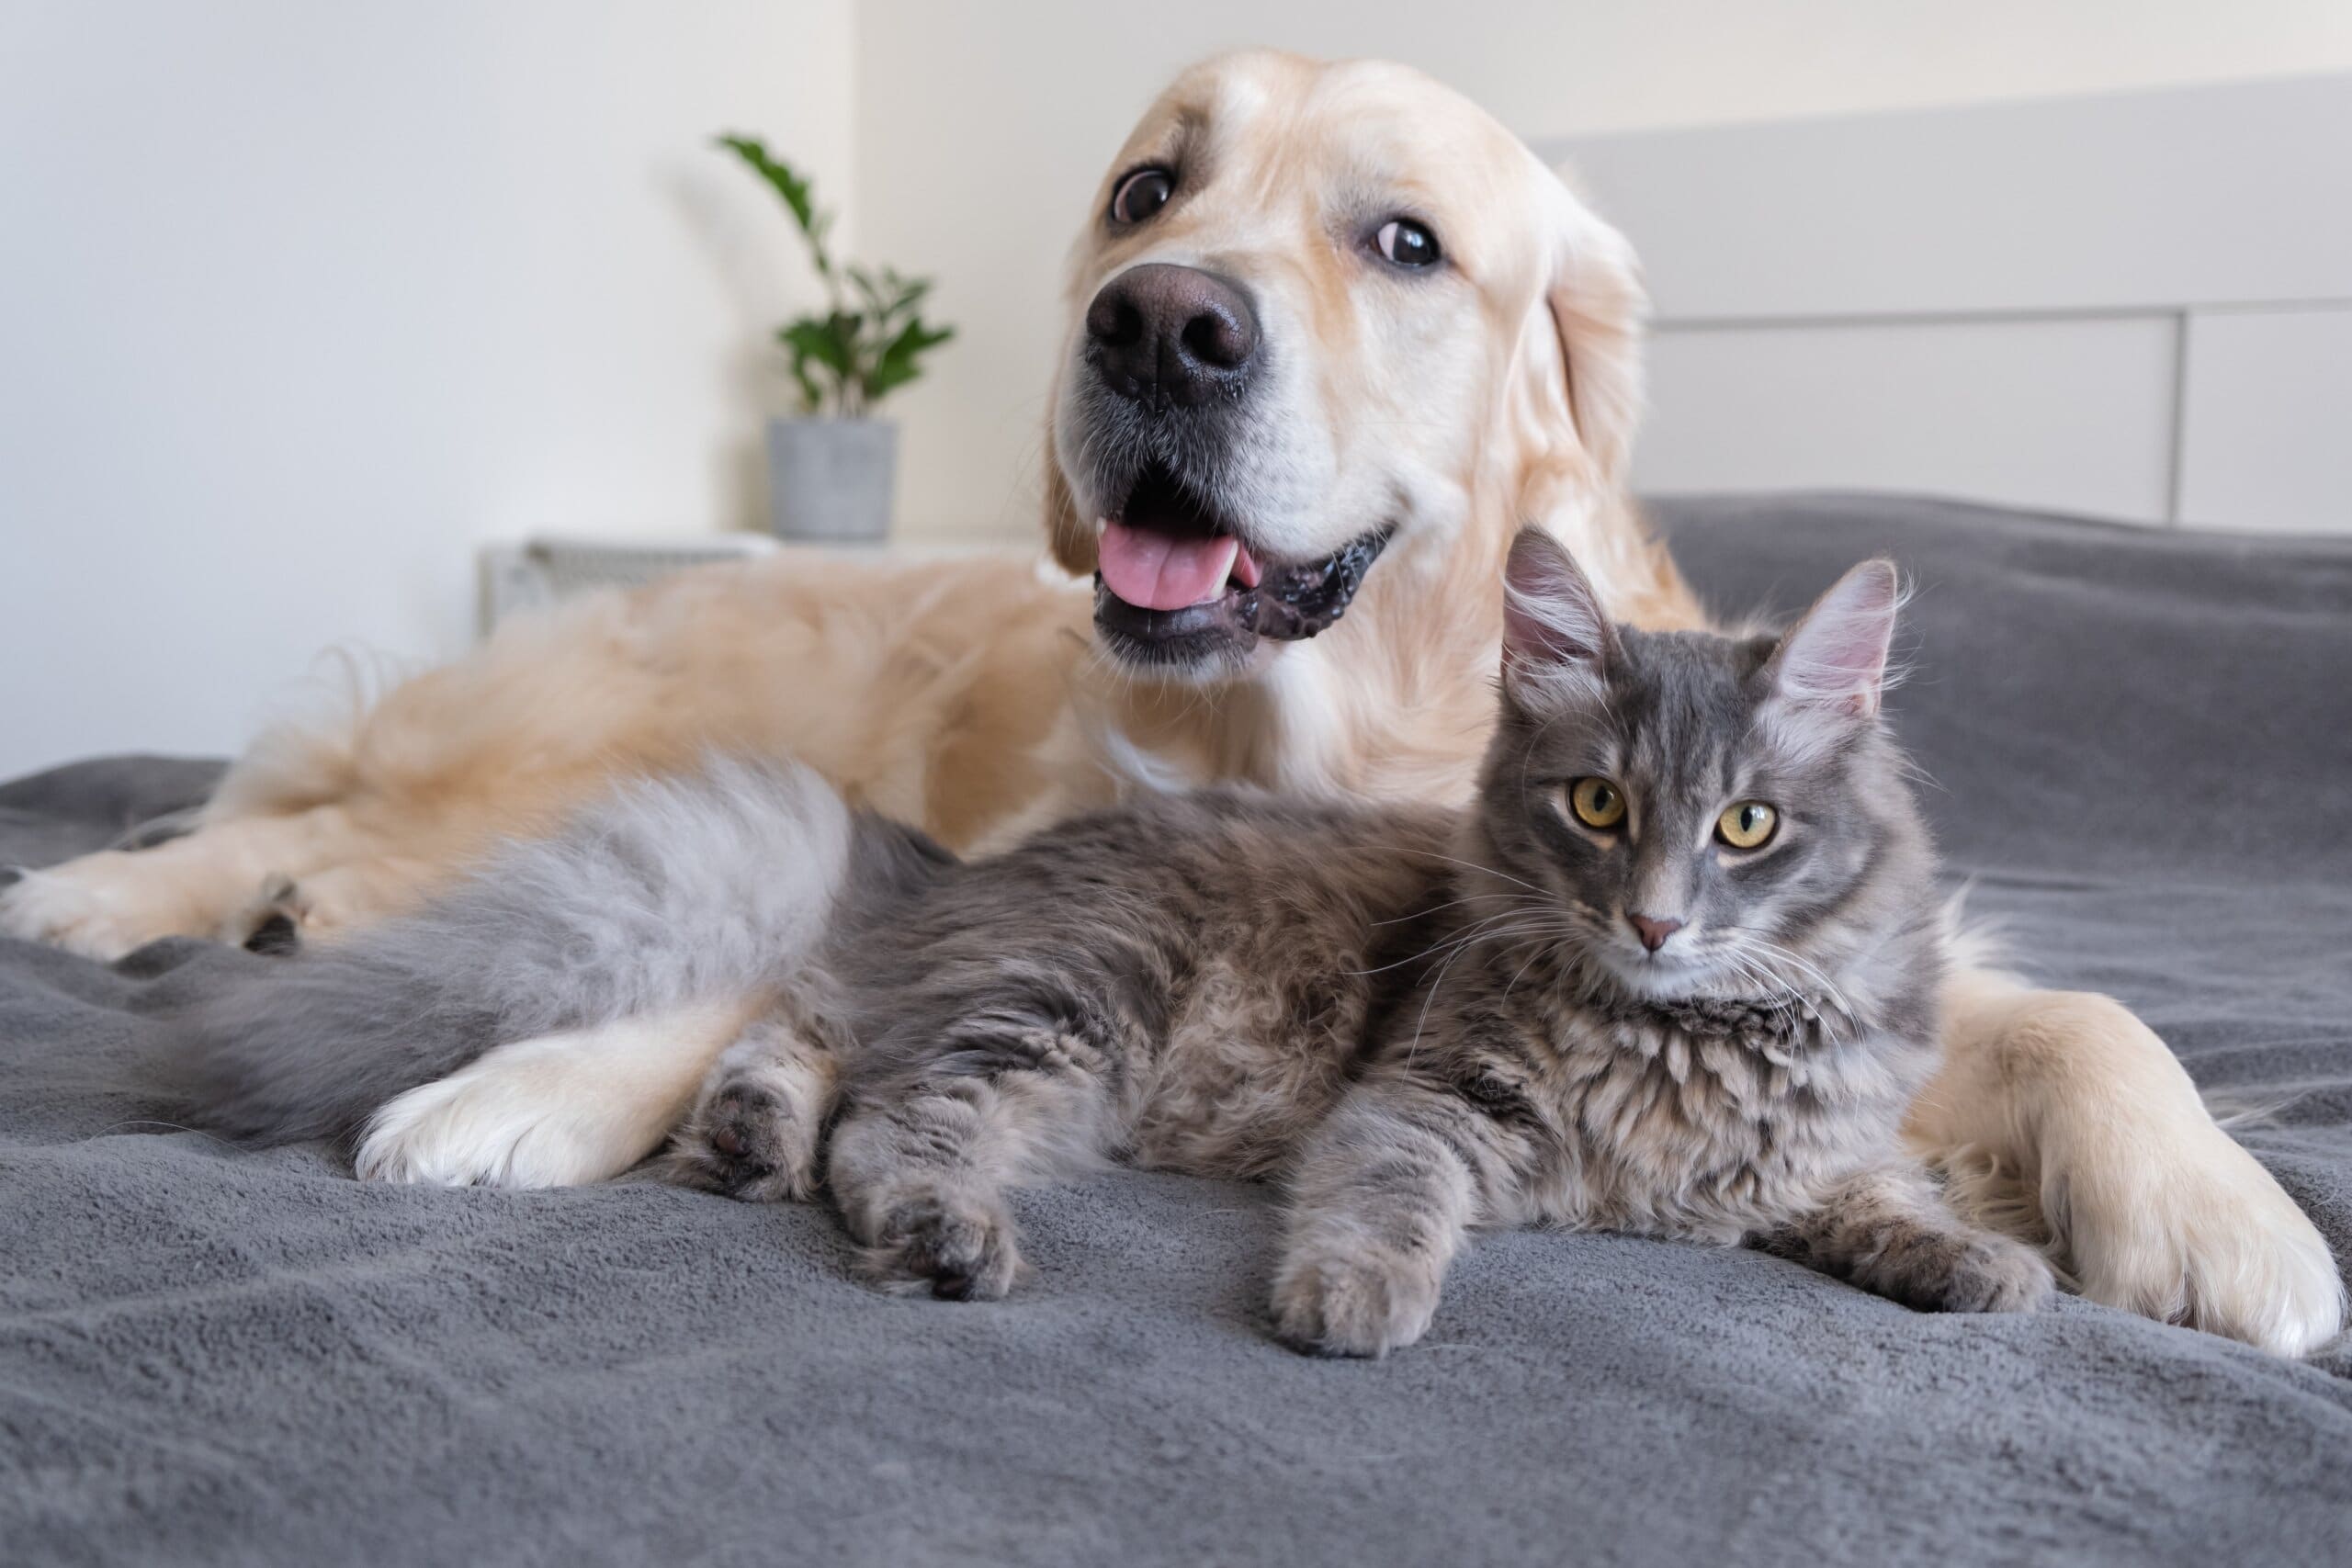 Golden retriever and grey cat lying together on a bed.